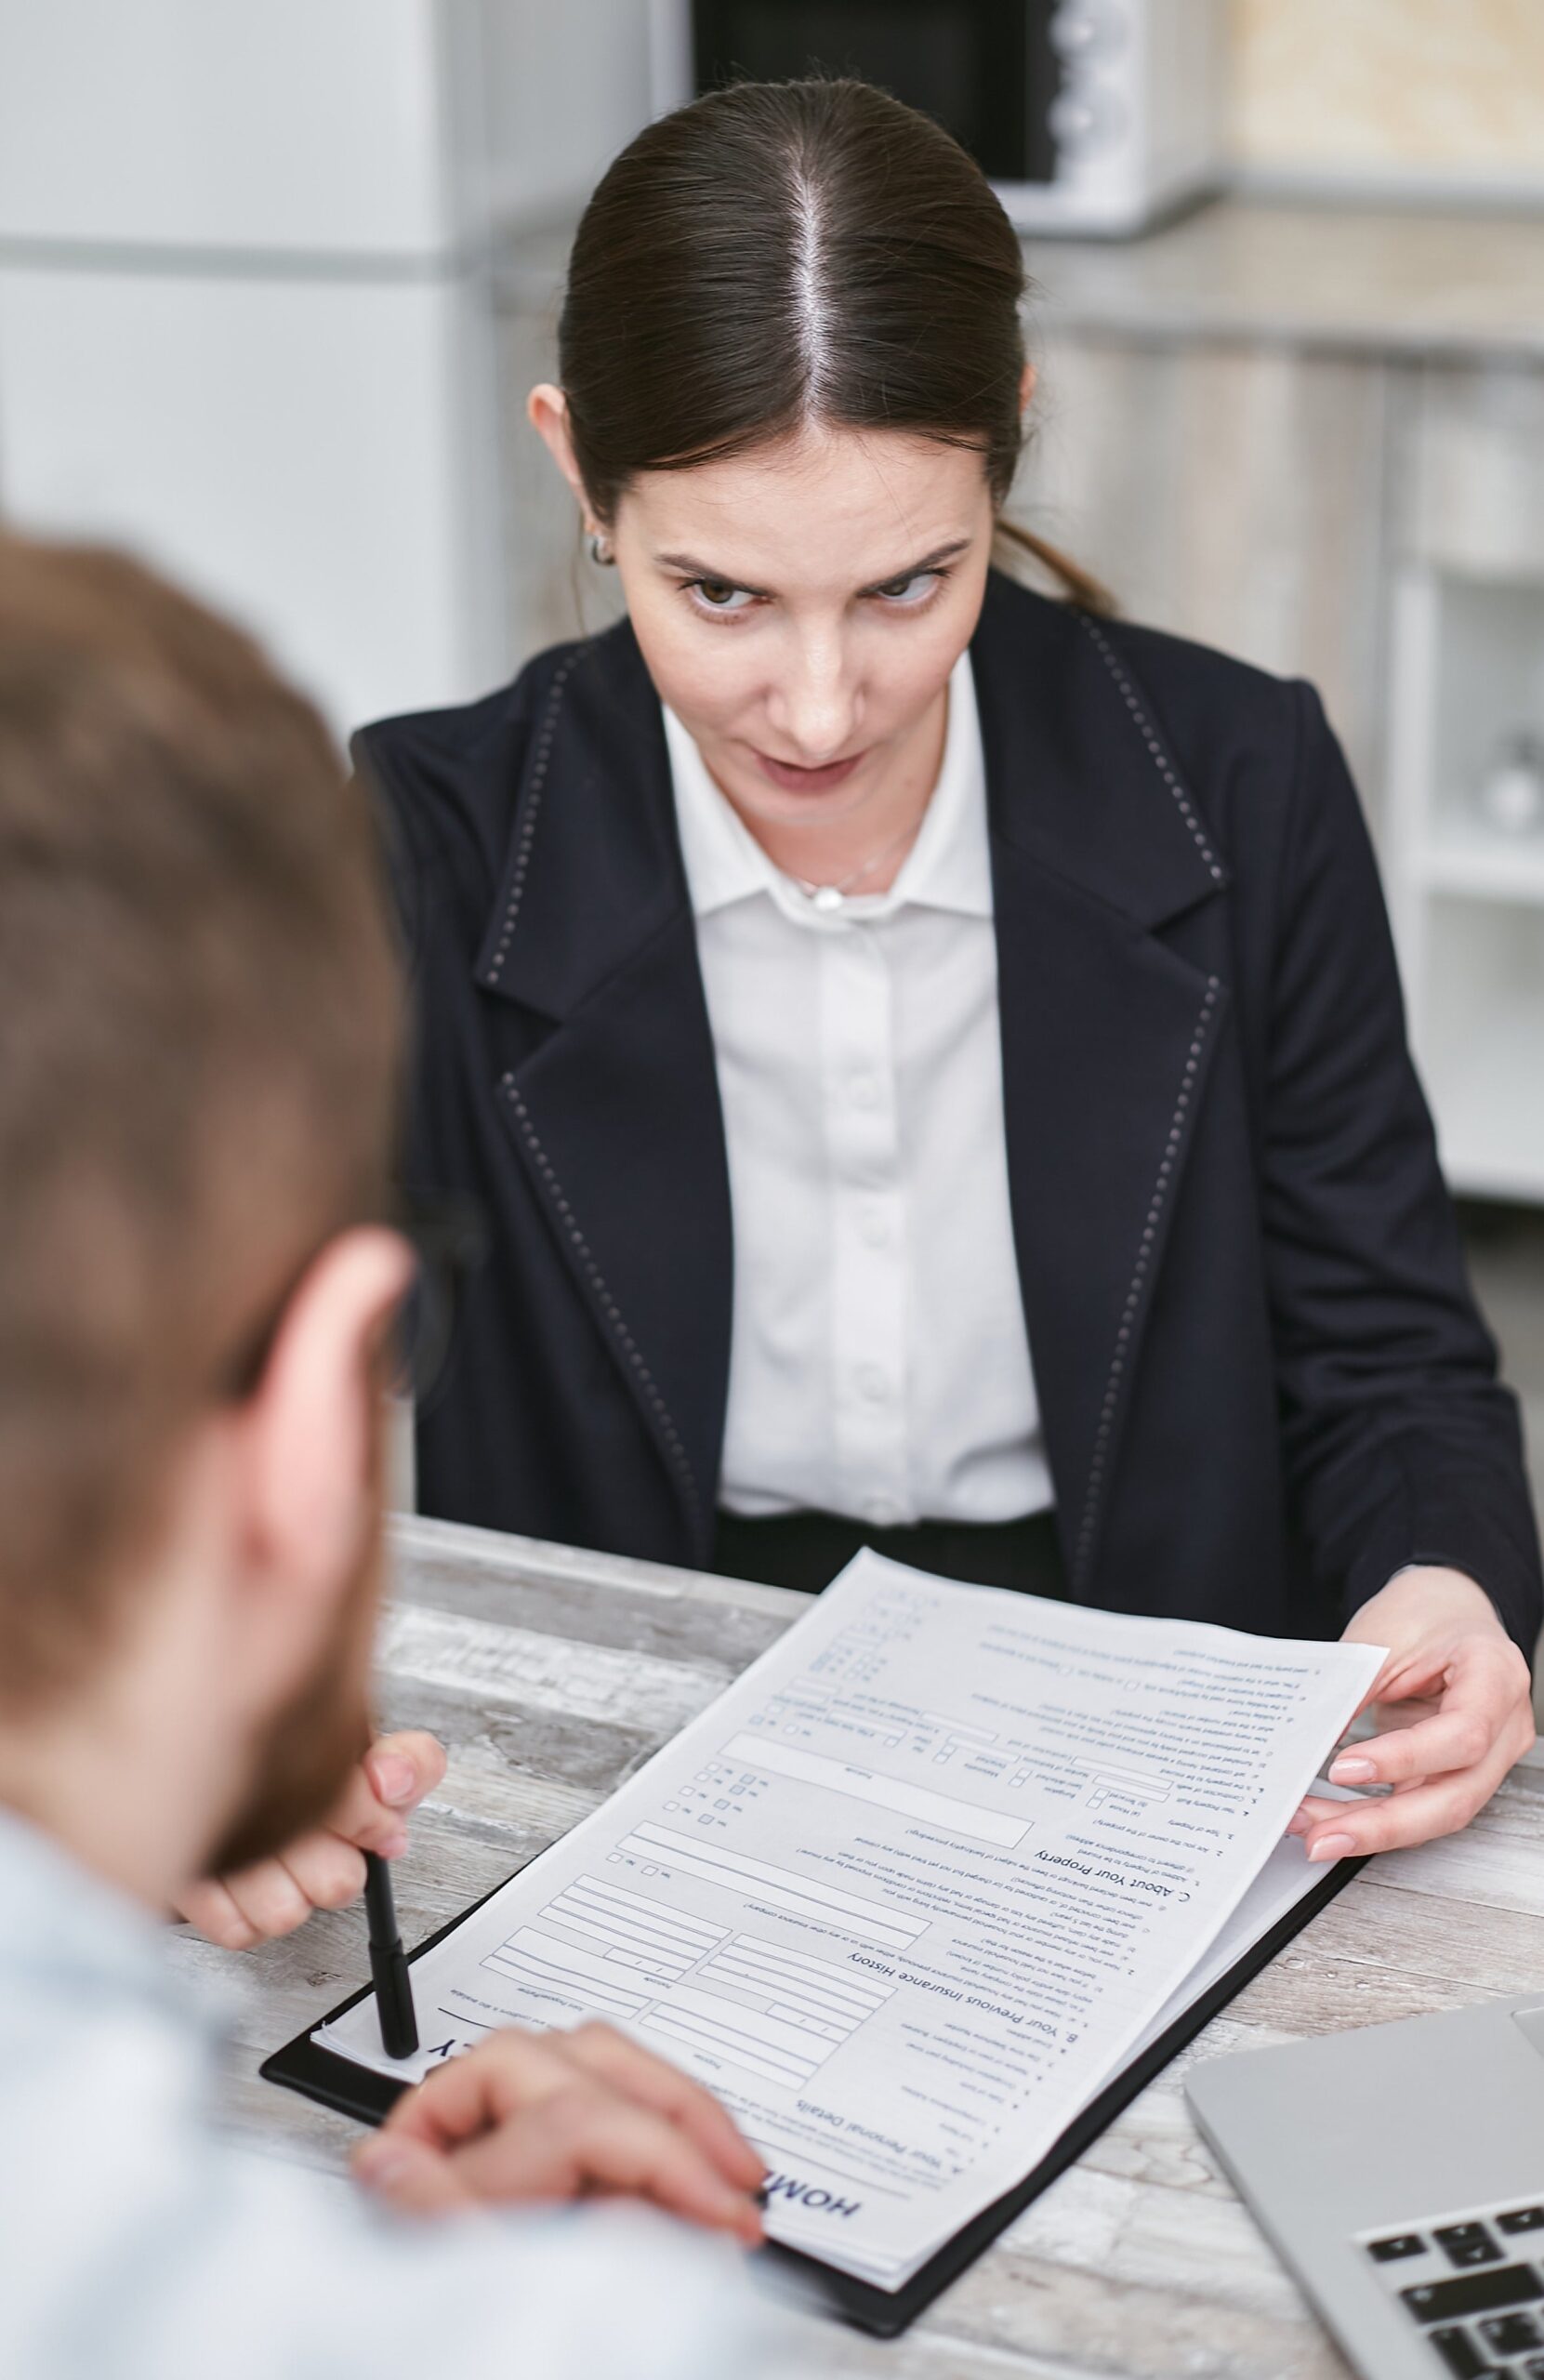 Woman being pre-approved for home loan